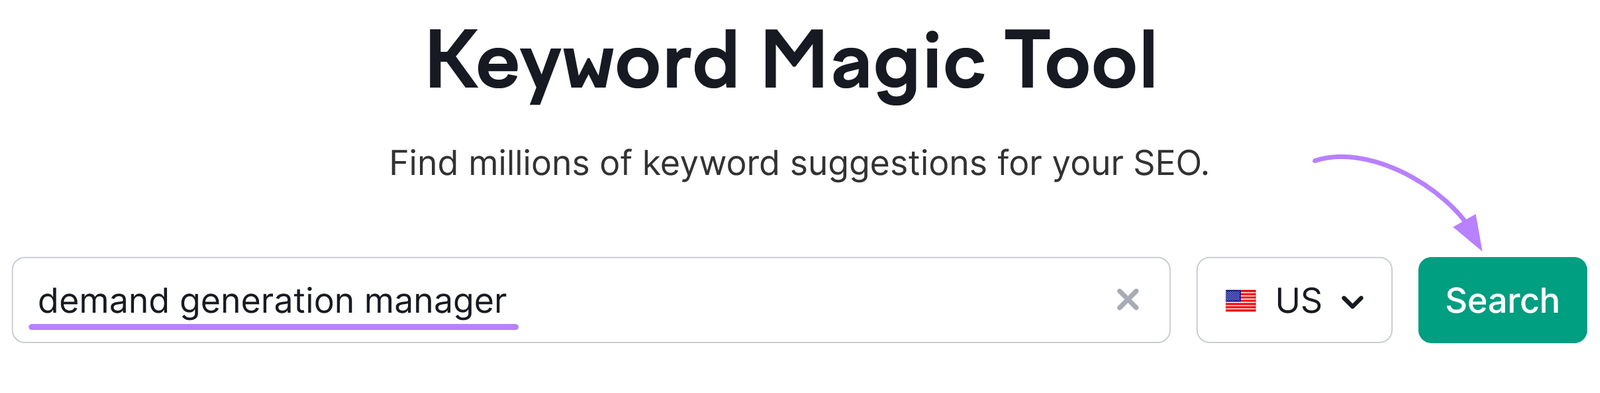 "demand generation manager" in Keyword Magic Tool search bar